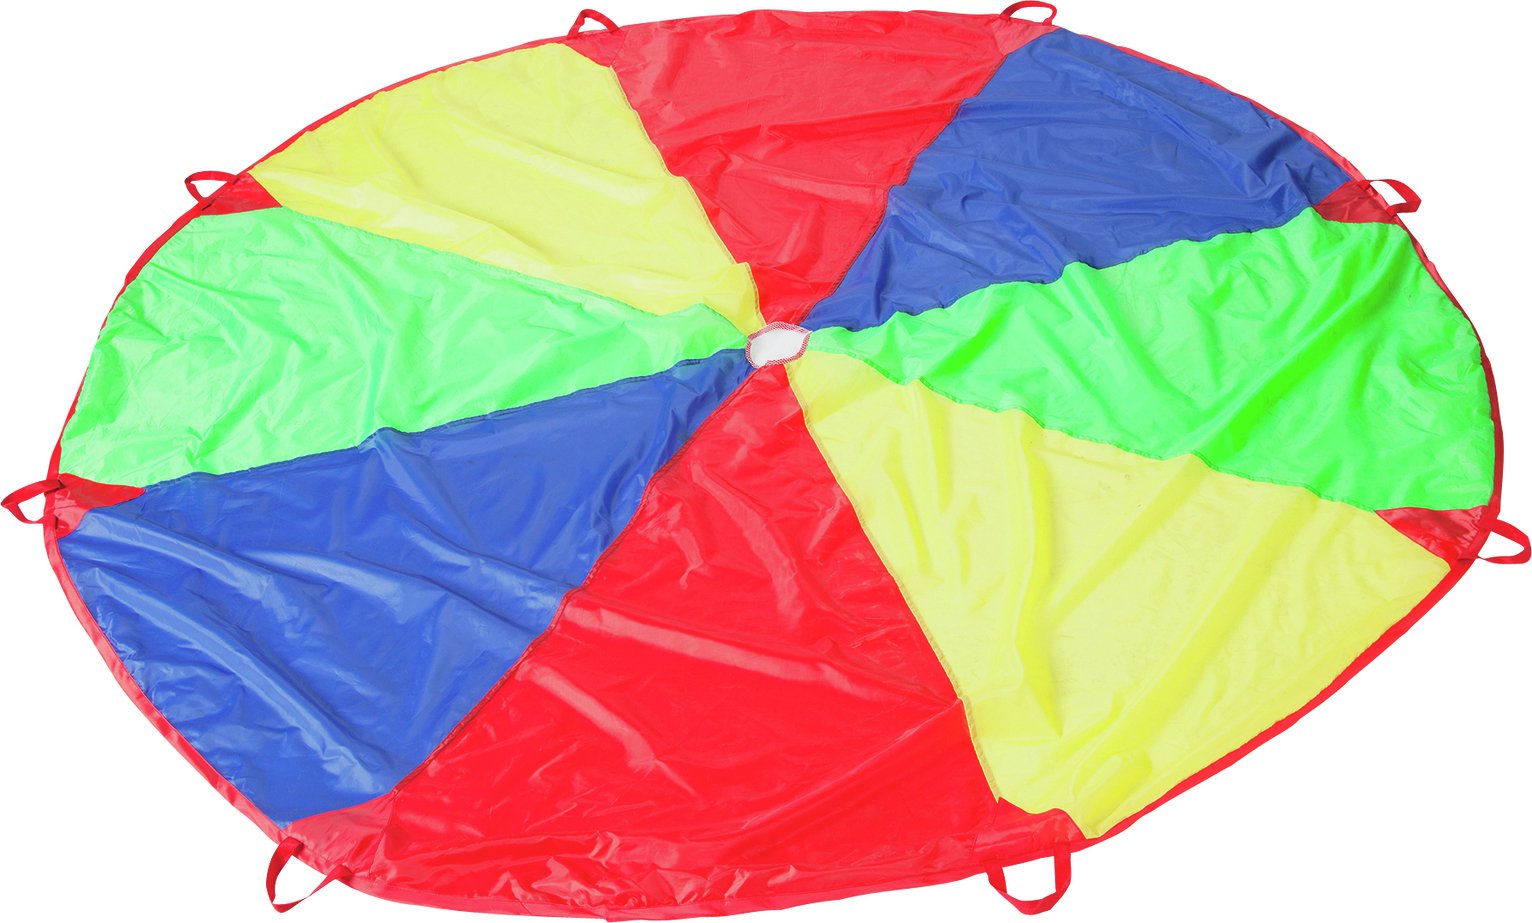 Chad Valley 2.5m Giant Parachute Review